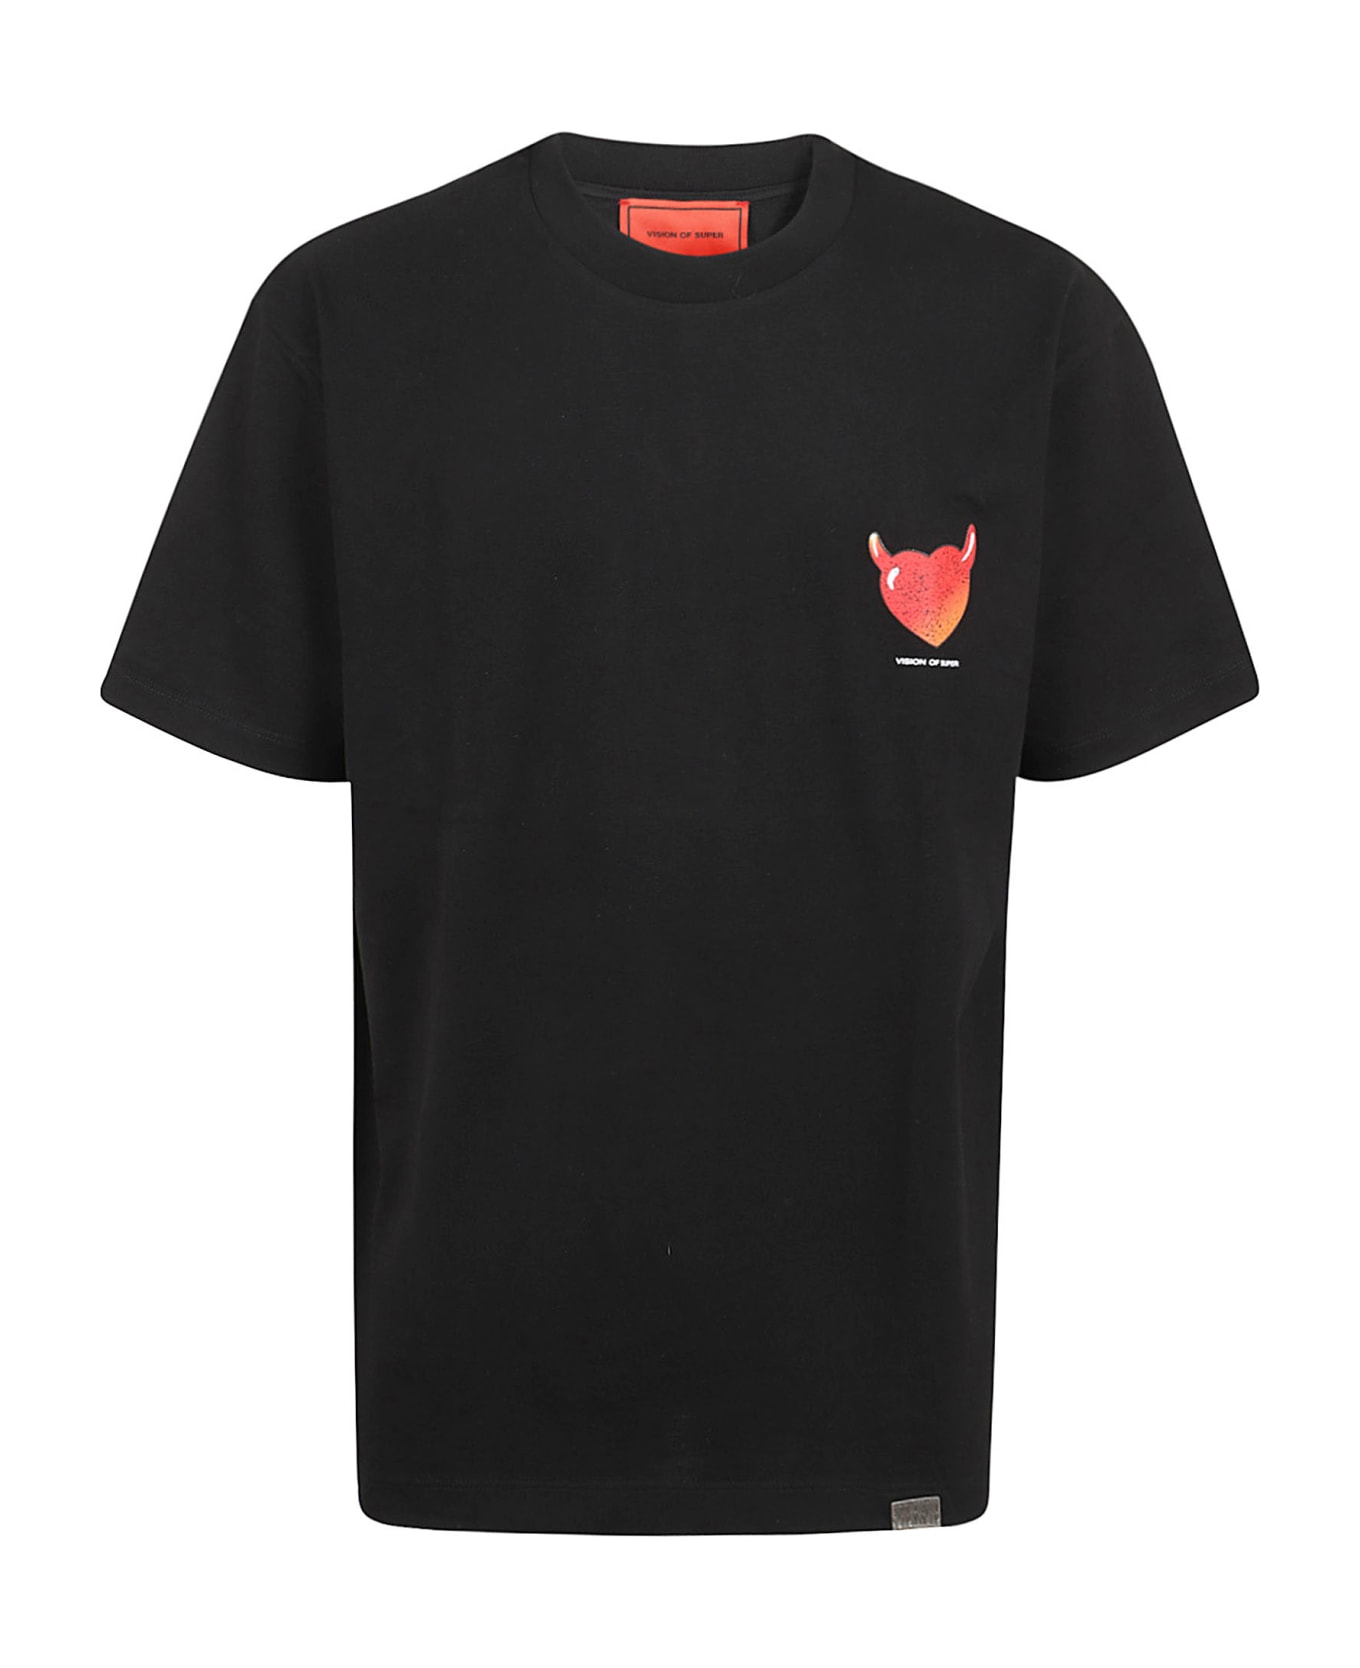 Vision of Super Black T-shirt With "puffy Love" Print - Black